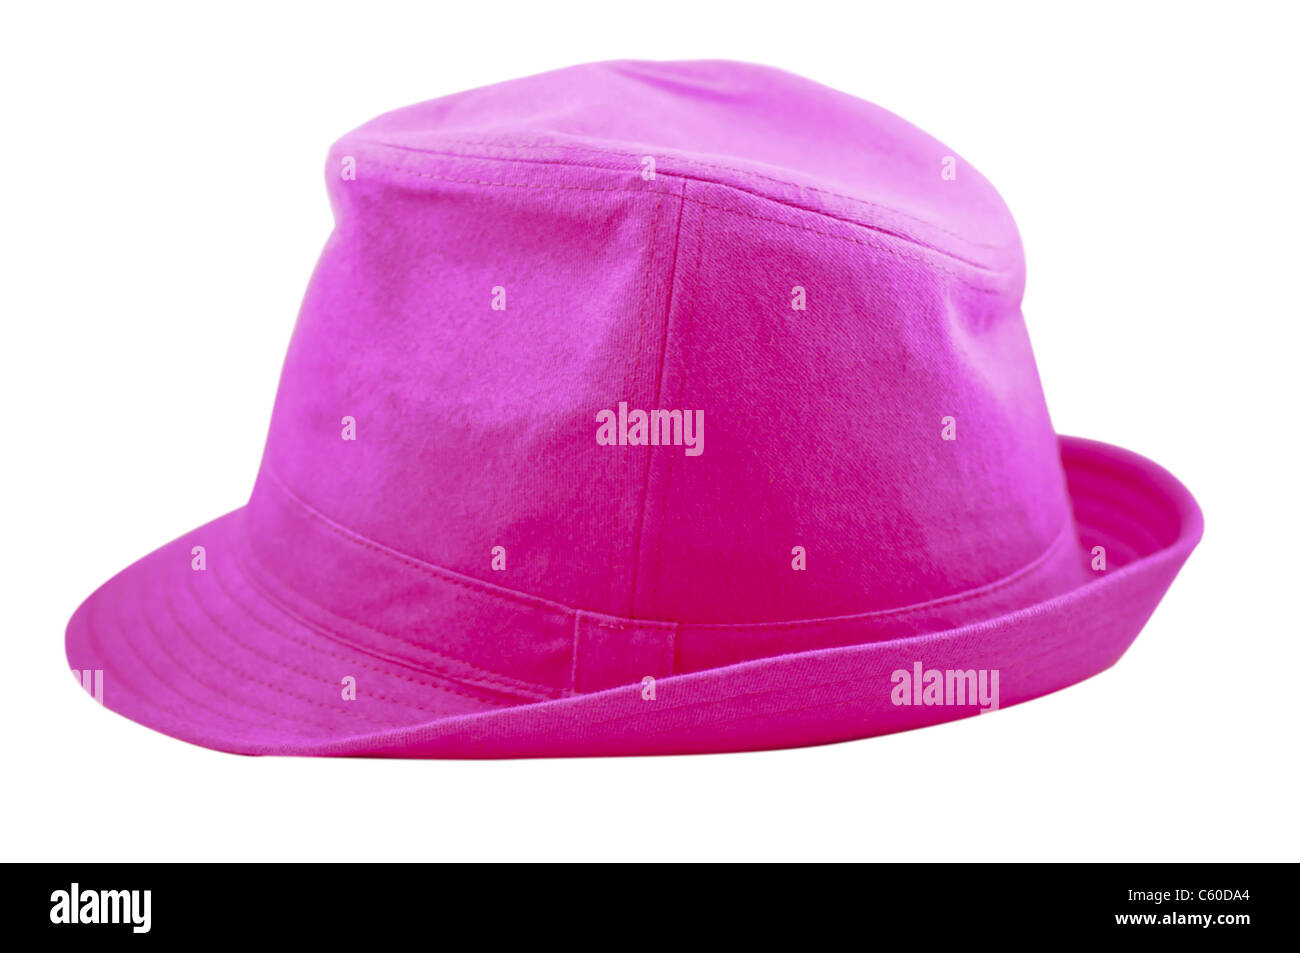 pink hat isolated on a white background Stock Photo